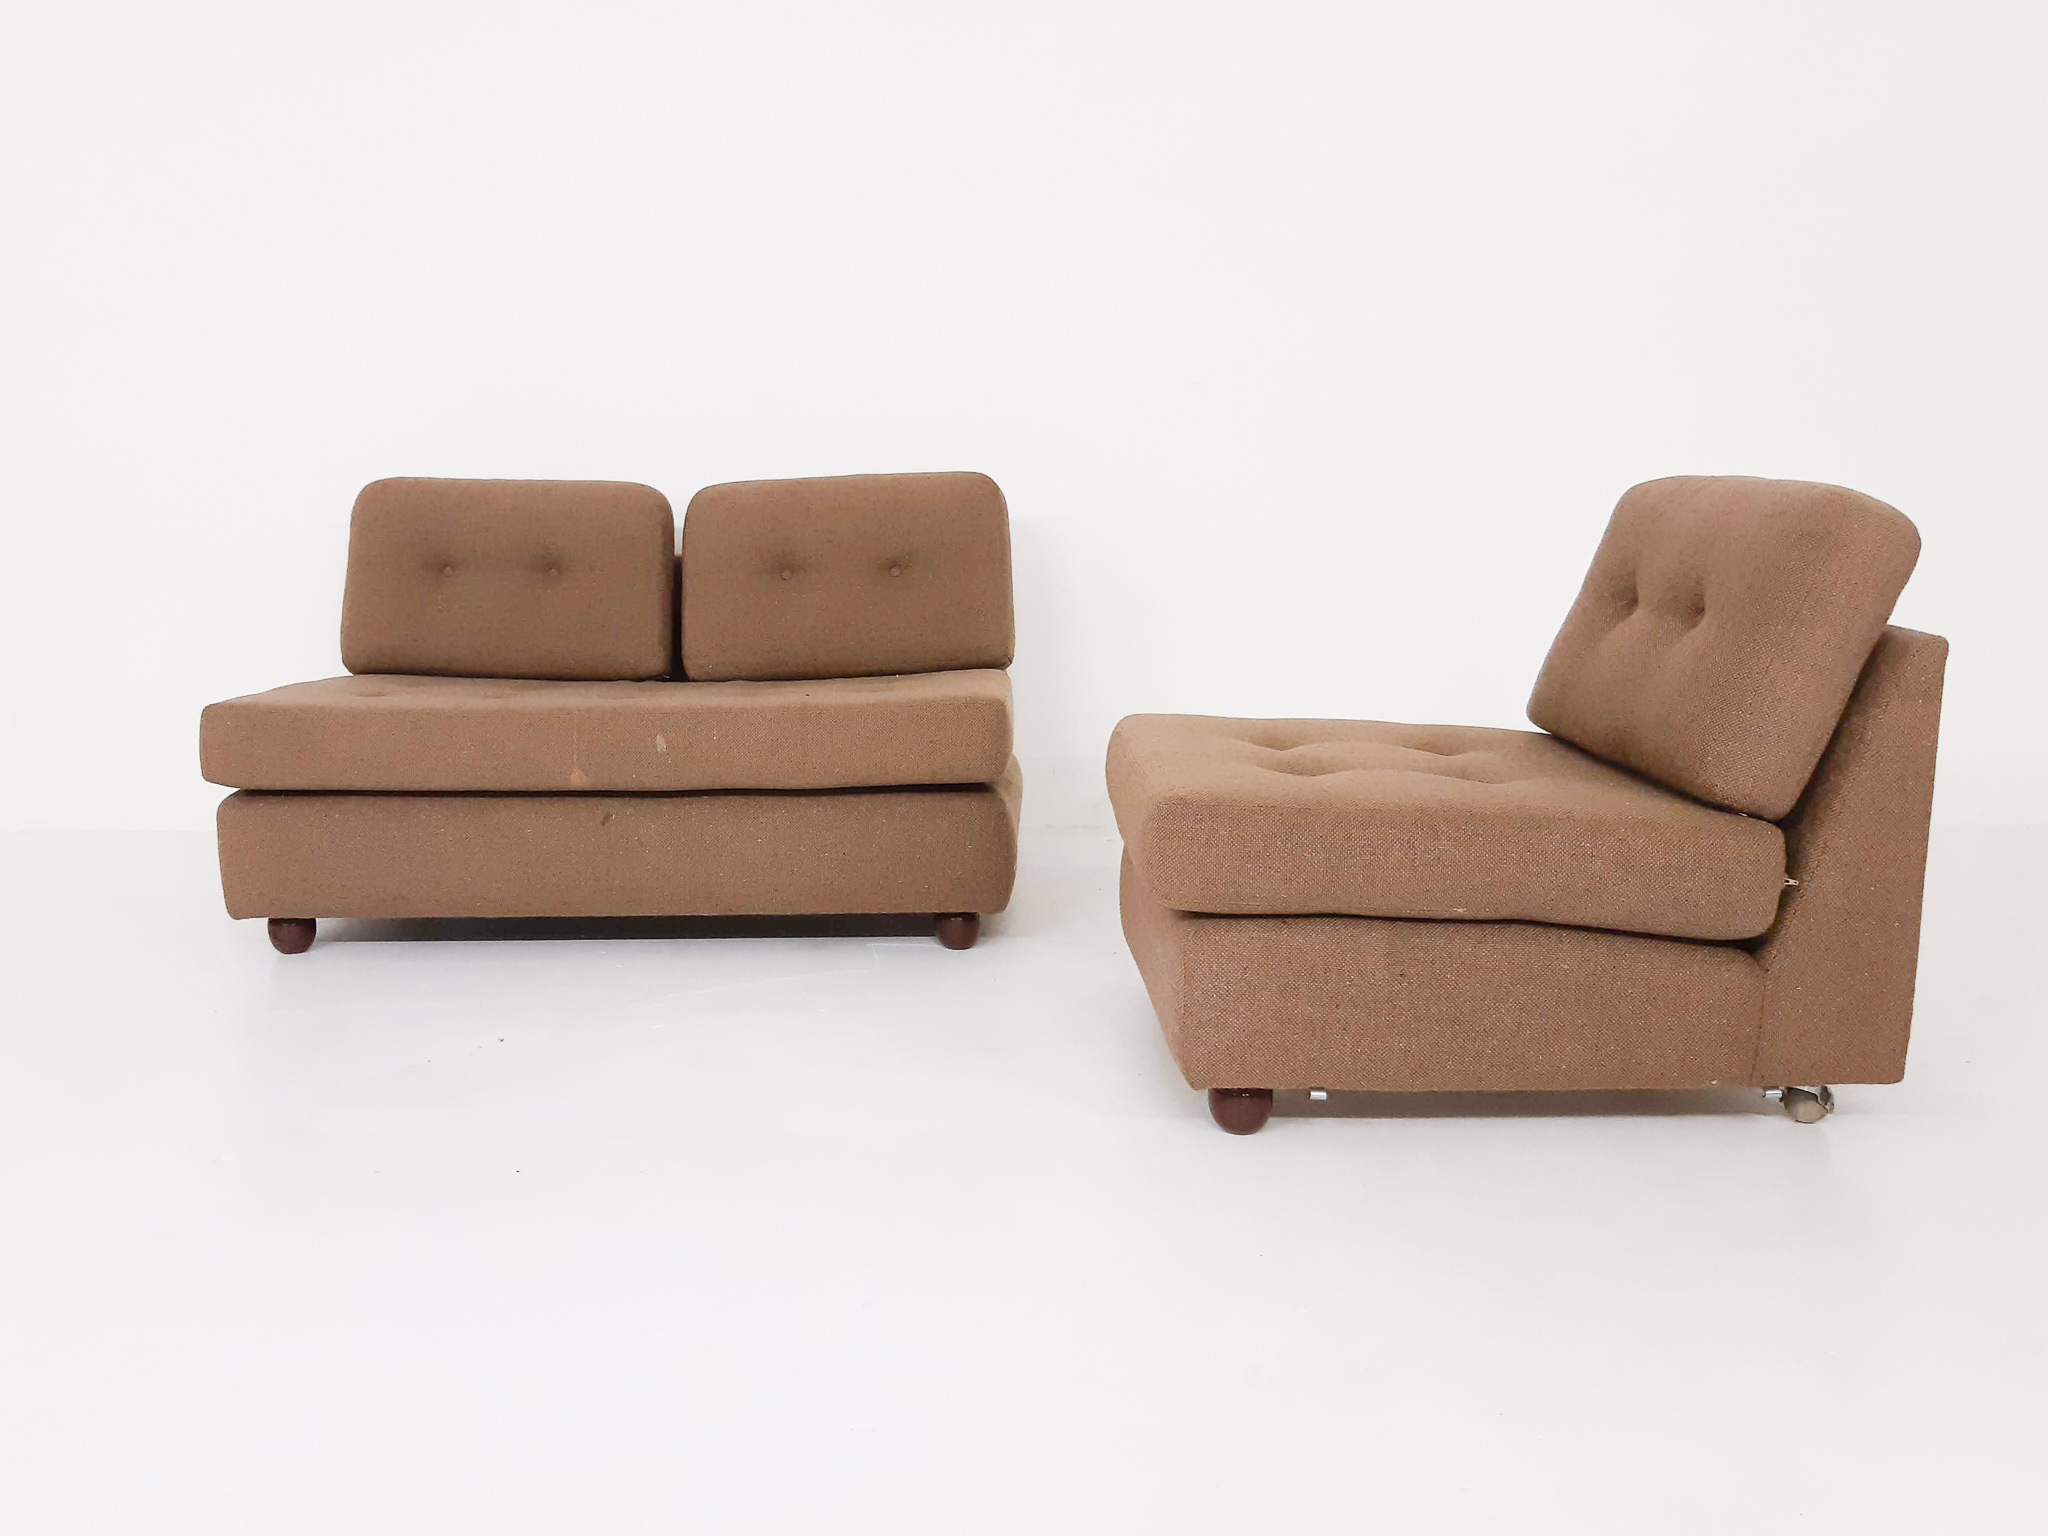 Sofas | Buy Vintage Zo Oud Als Goed Seating Design at